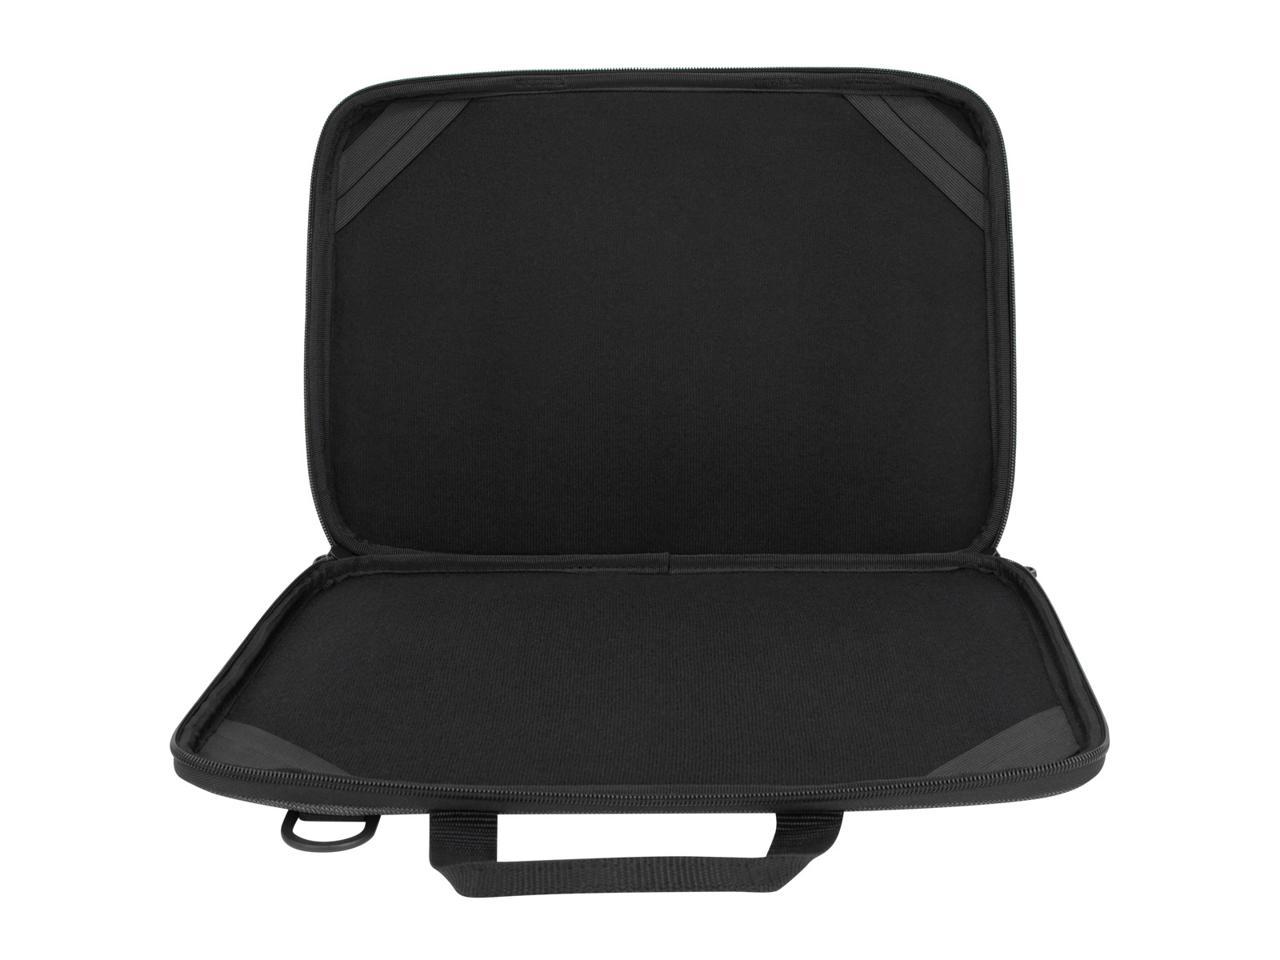 Targus 13-14" Work-in Essentials Case for Chromebook - TED007GL